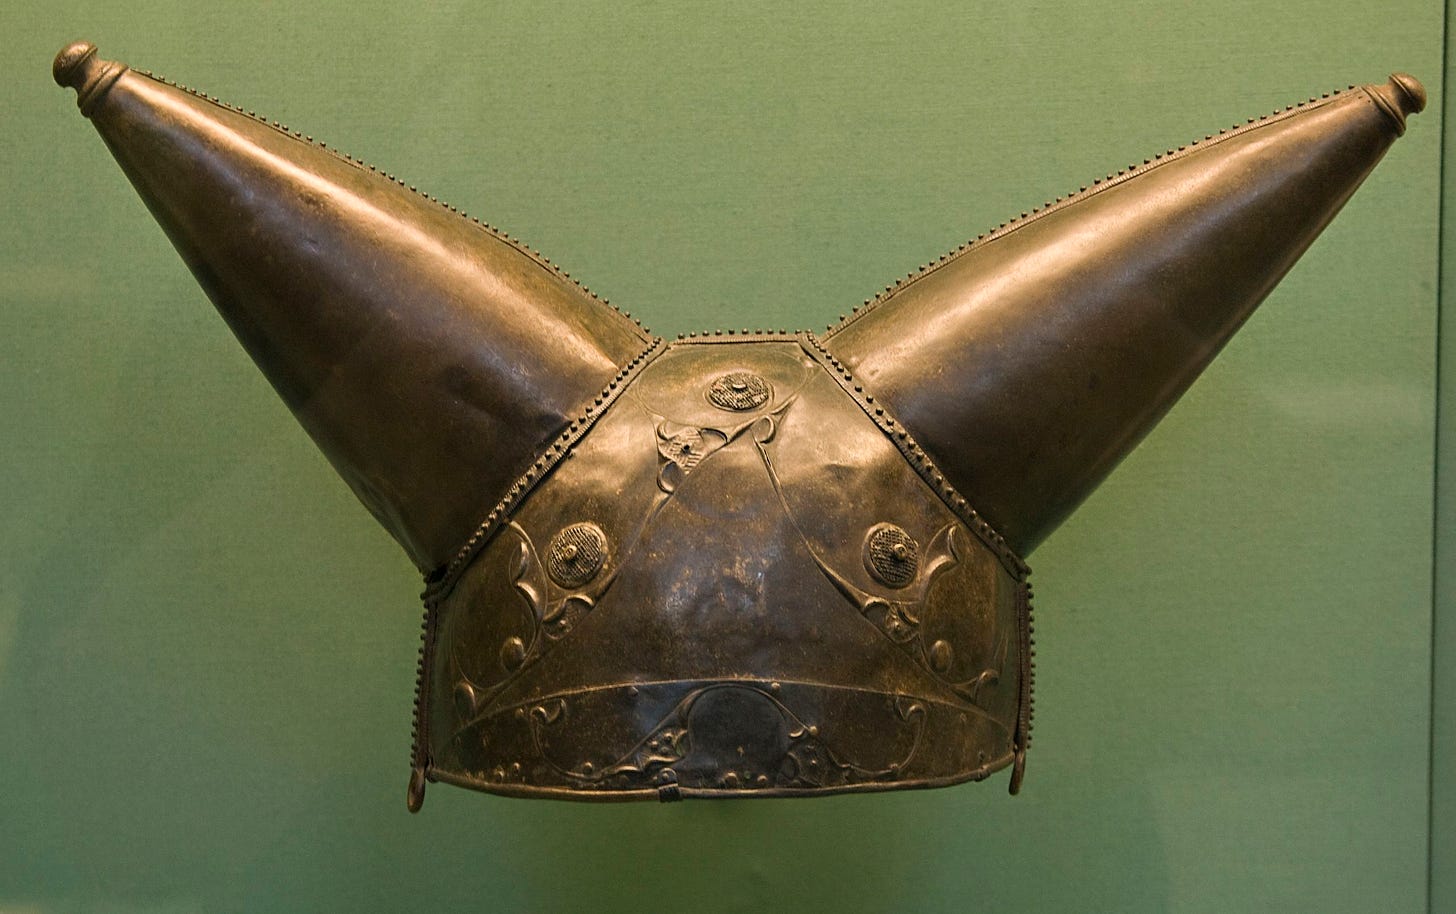 Bronze helmet with two conical horns